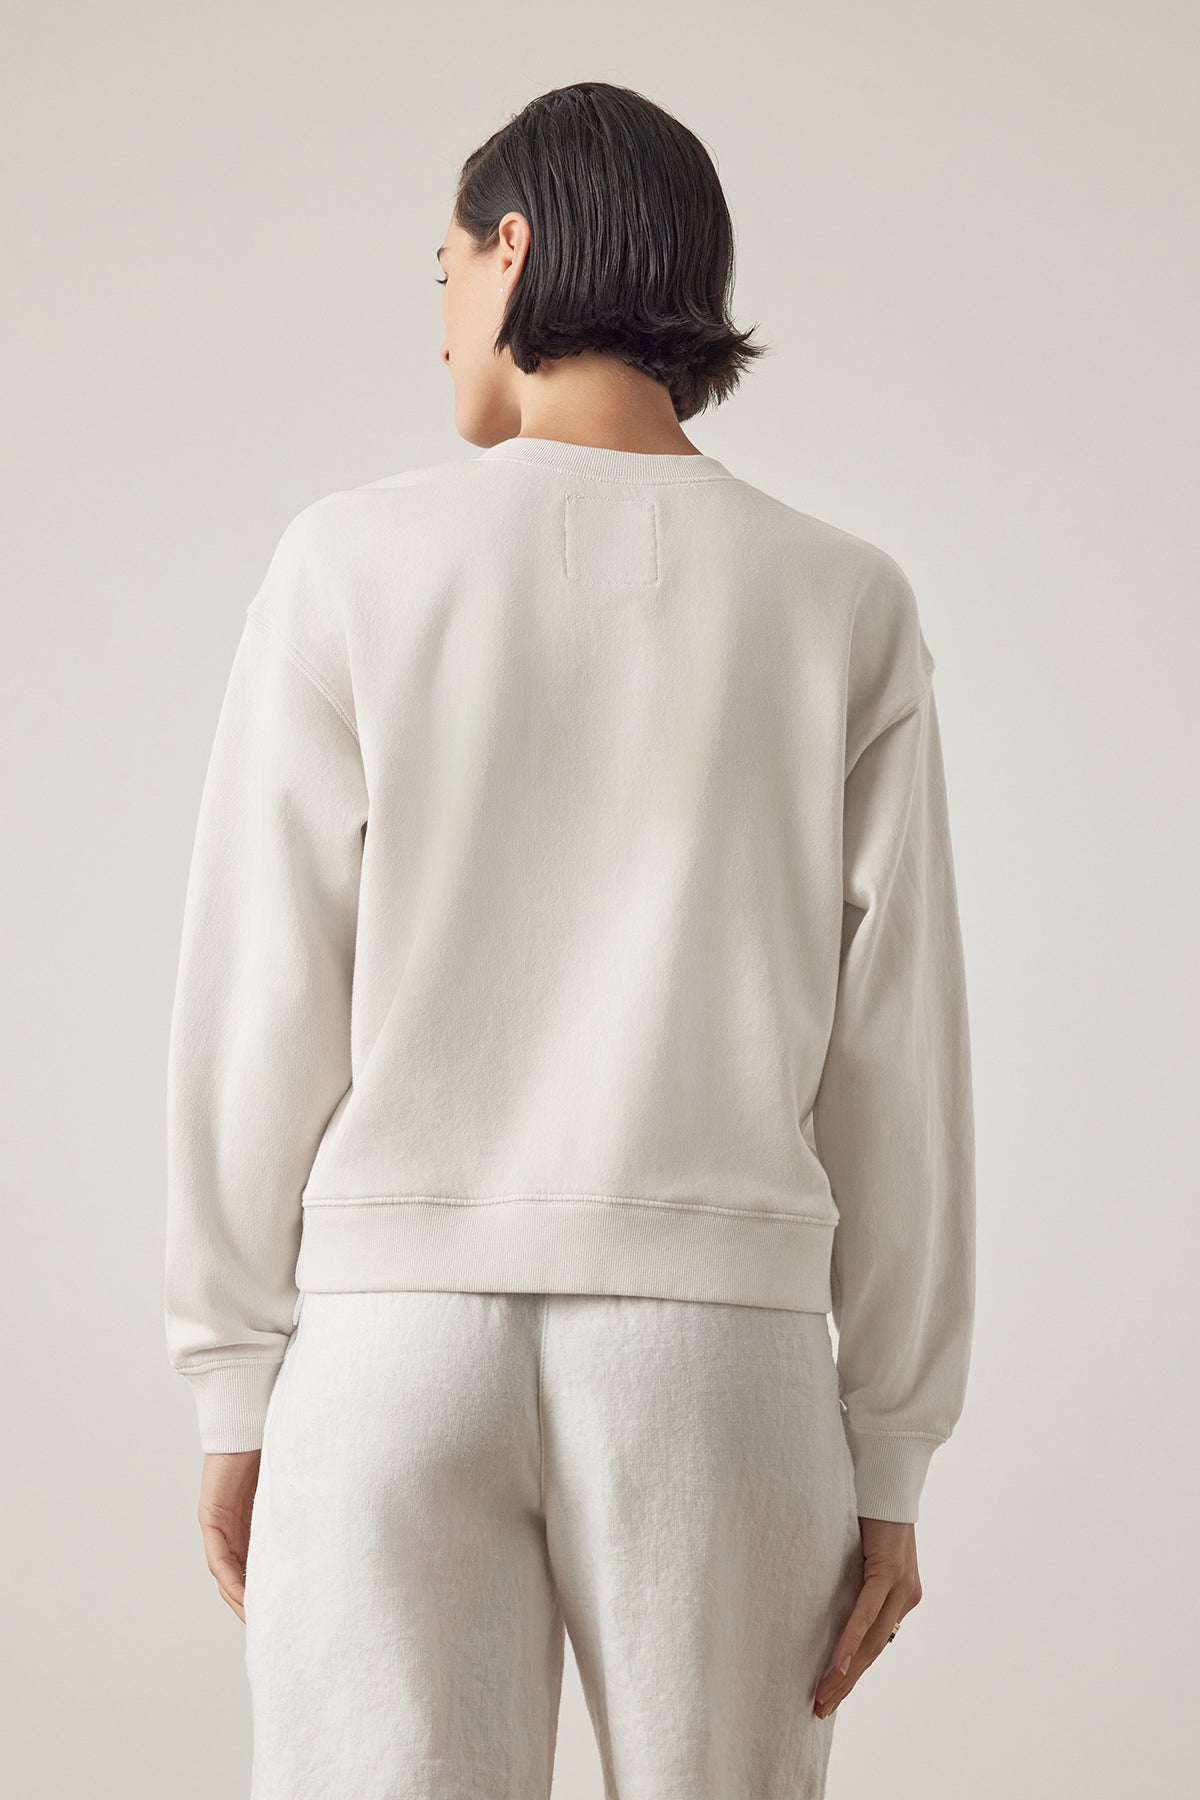   Rear view of a person with short black hair wearing a Velvet by Jenny Graham Ynez sweatshirt and matching pants made of organic cotton, standing against a neutral background. 